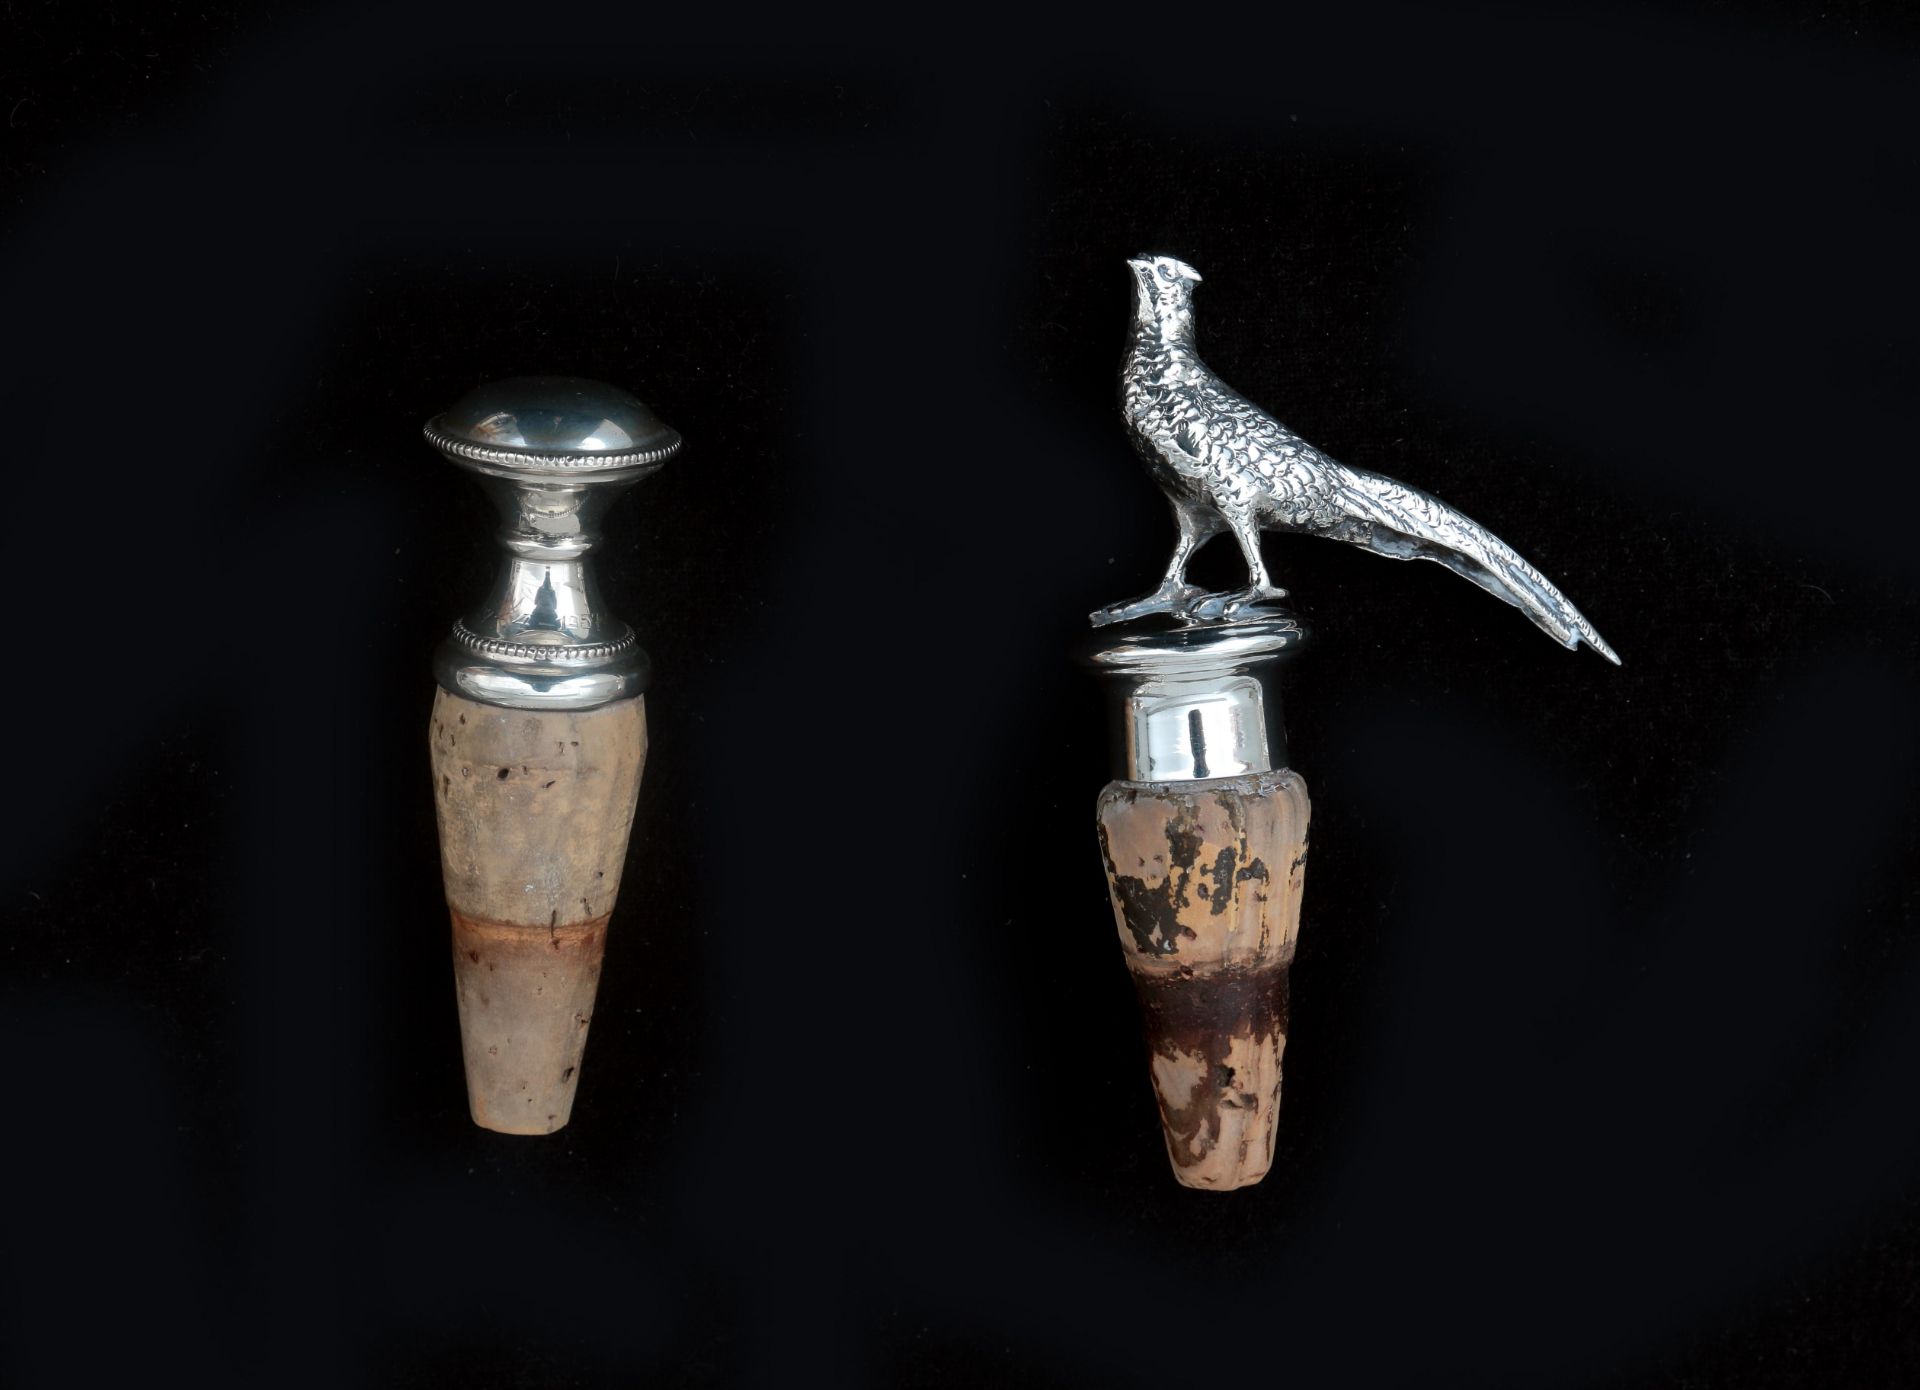 A pair of silver decorative corks, one with a miniature silver pheasant, this one sterling silver,